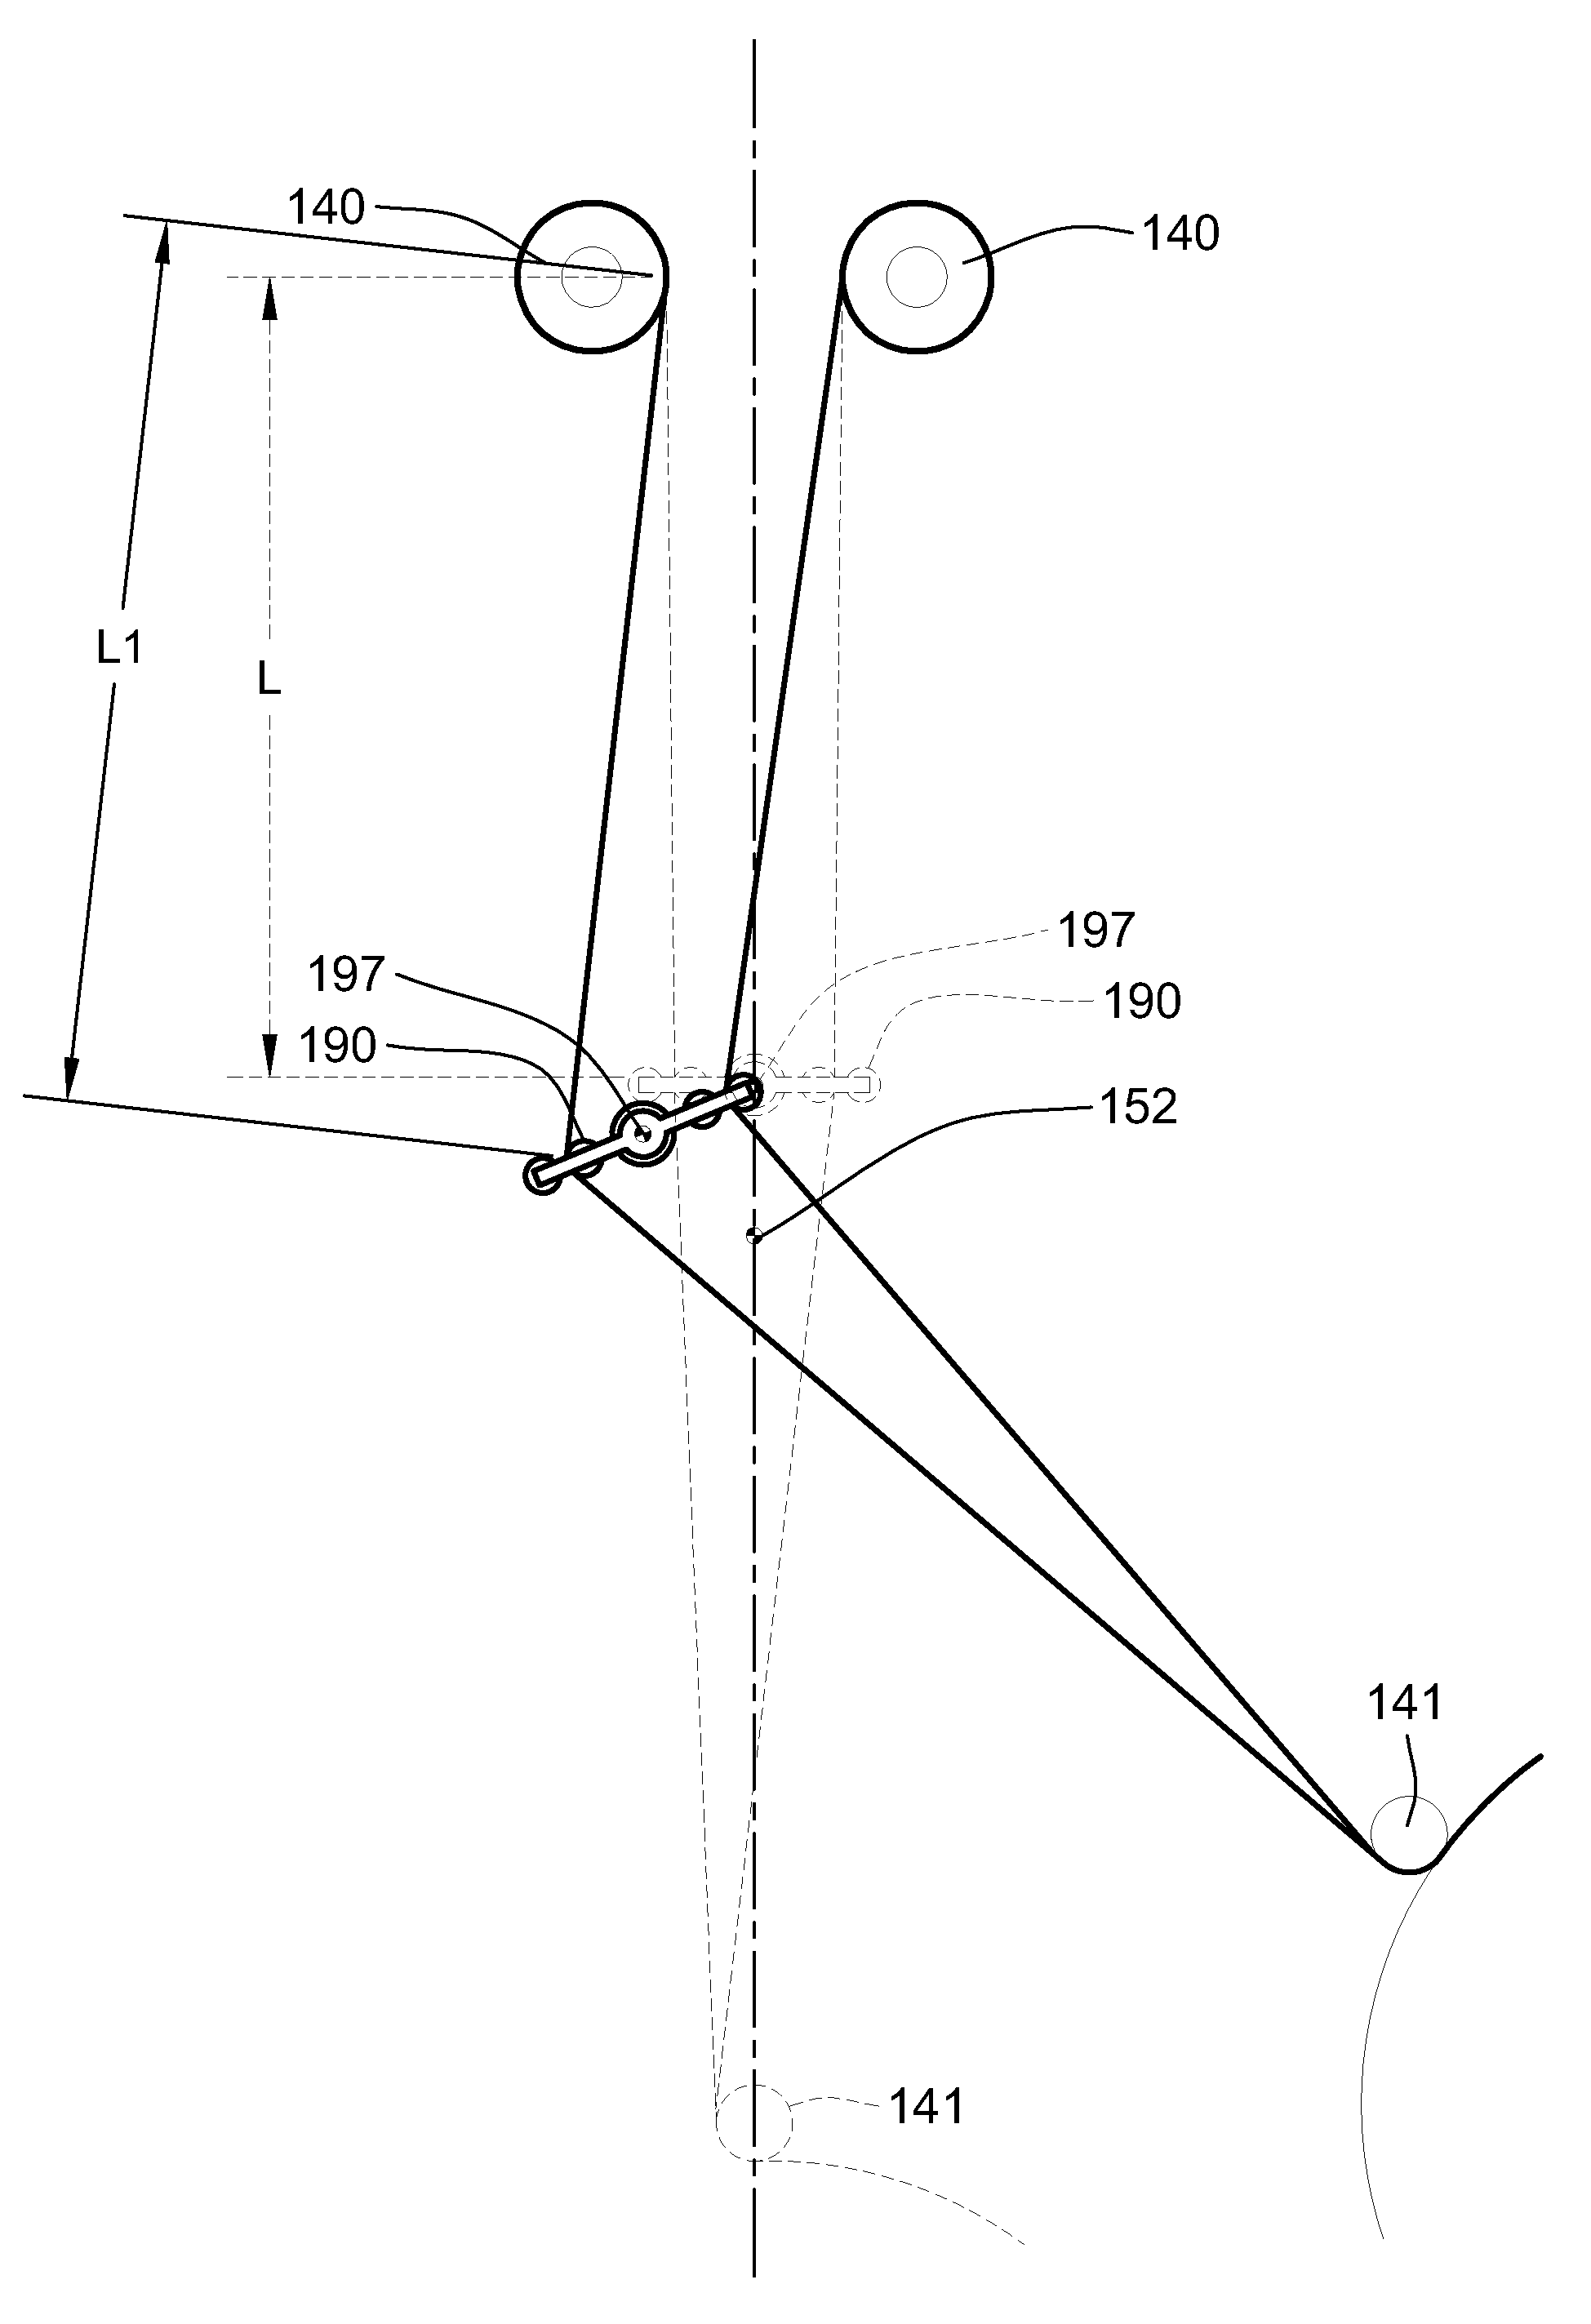 Fiber delivery apparatus and system having a creel and fiber placement head with polar axis of rotation